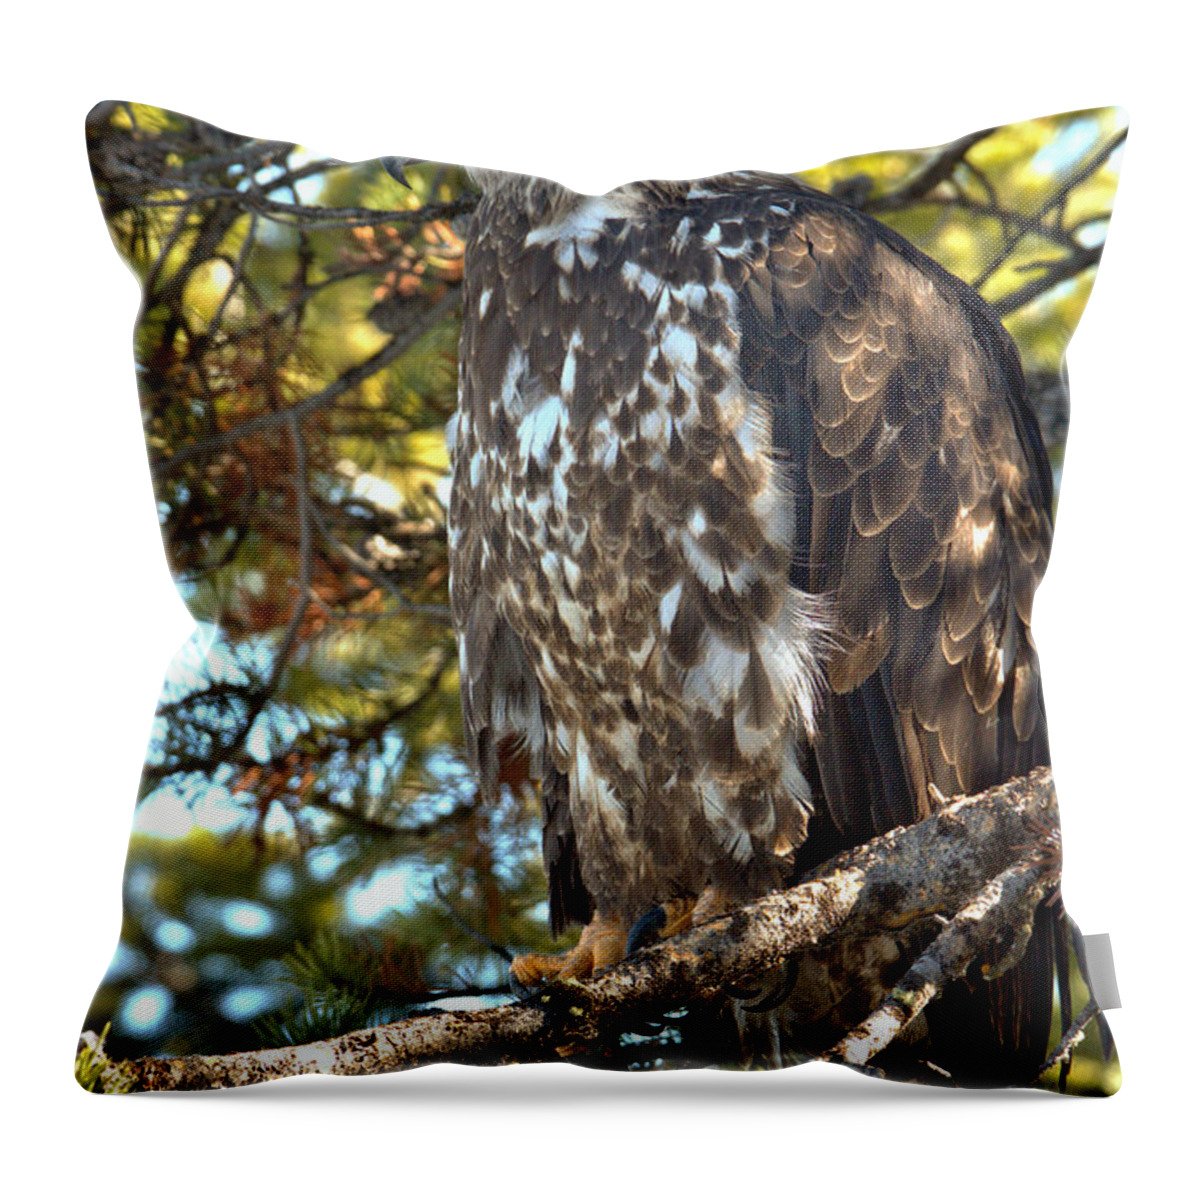 Golden Eagle Throw Pillow featuring the photograph Perched And Camouflaged by Adam Jewell